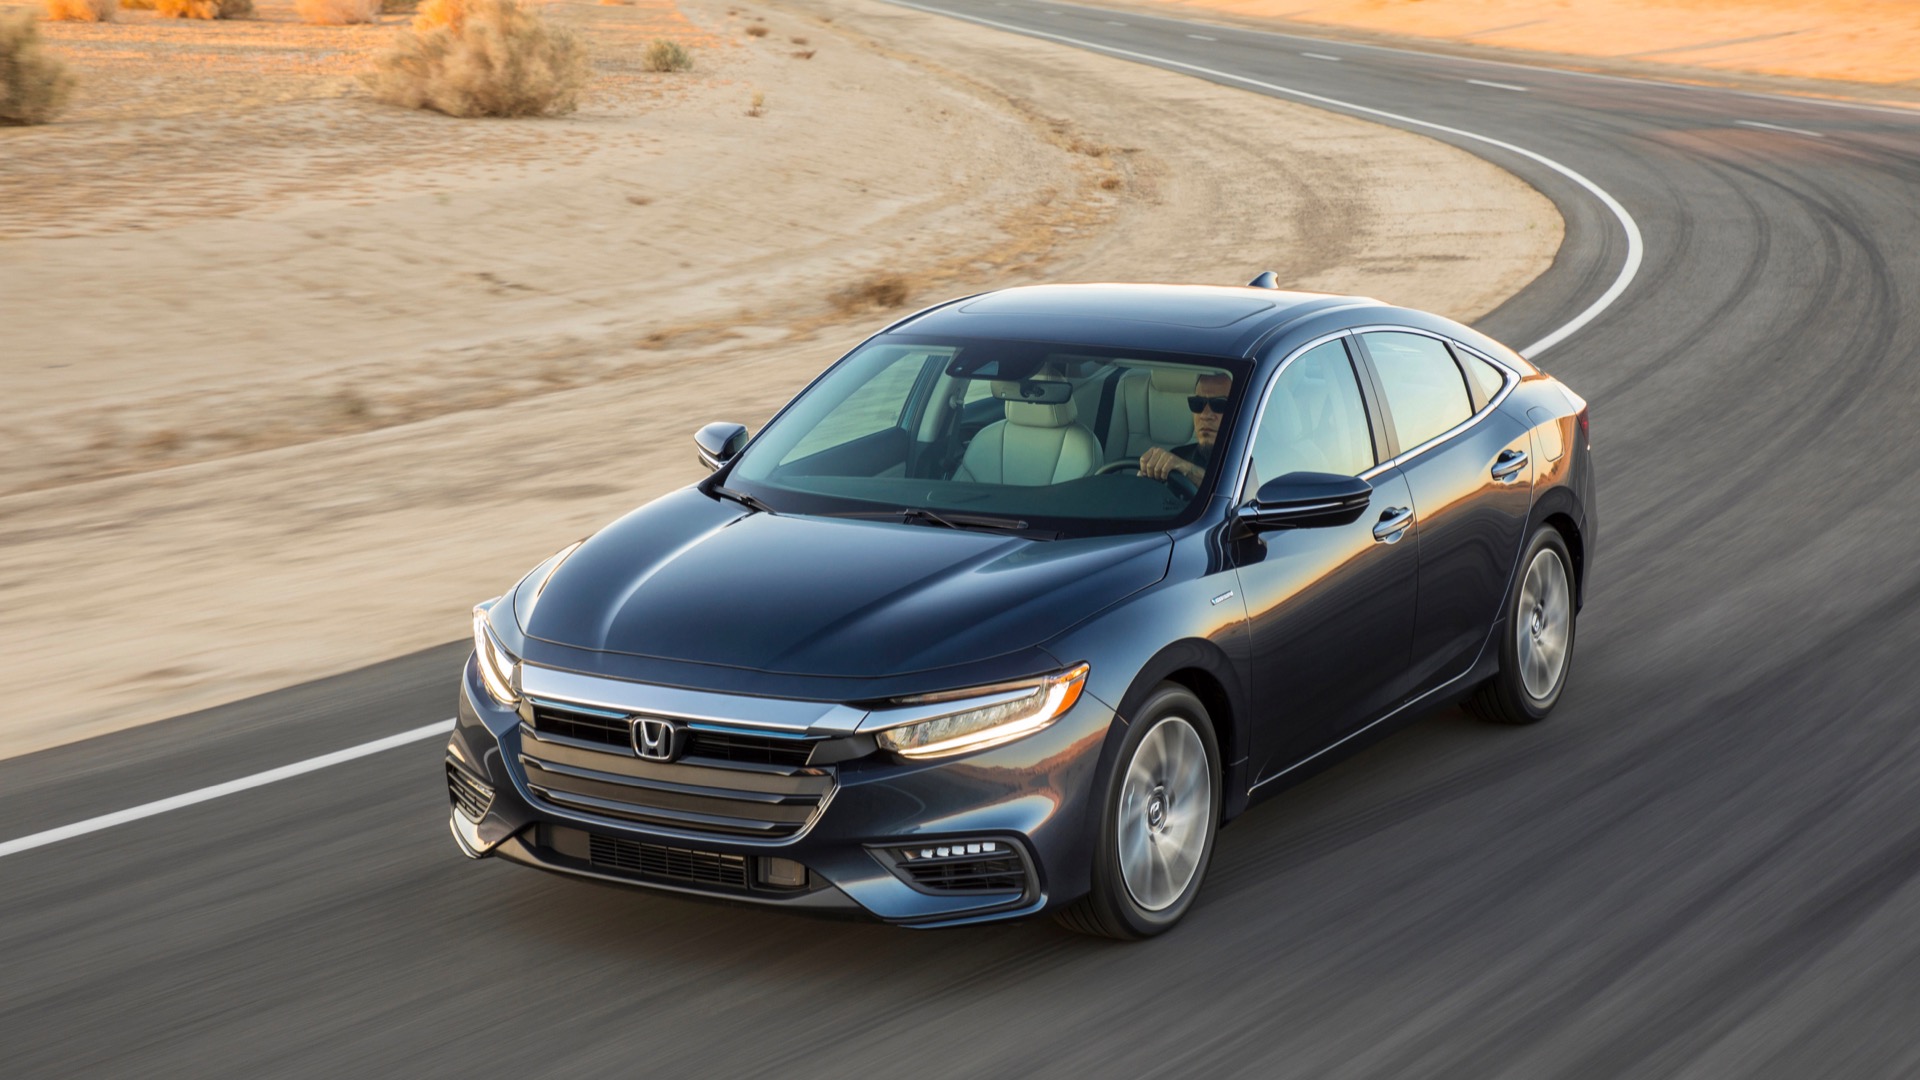 New and Used Honda Insight Prices, Photos, Reviews, Specs The Car